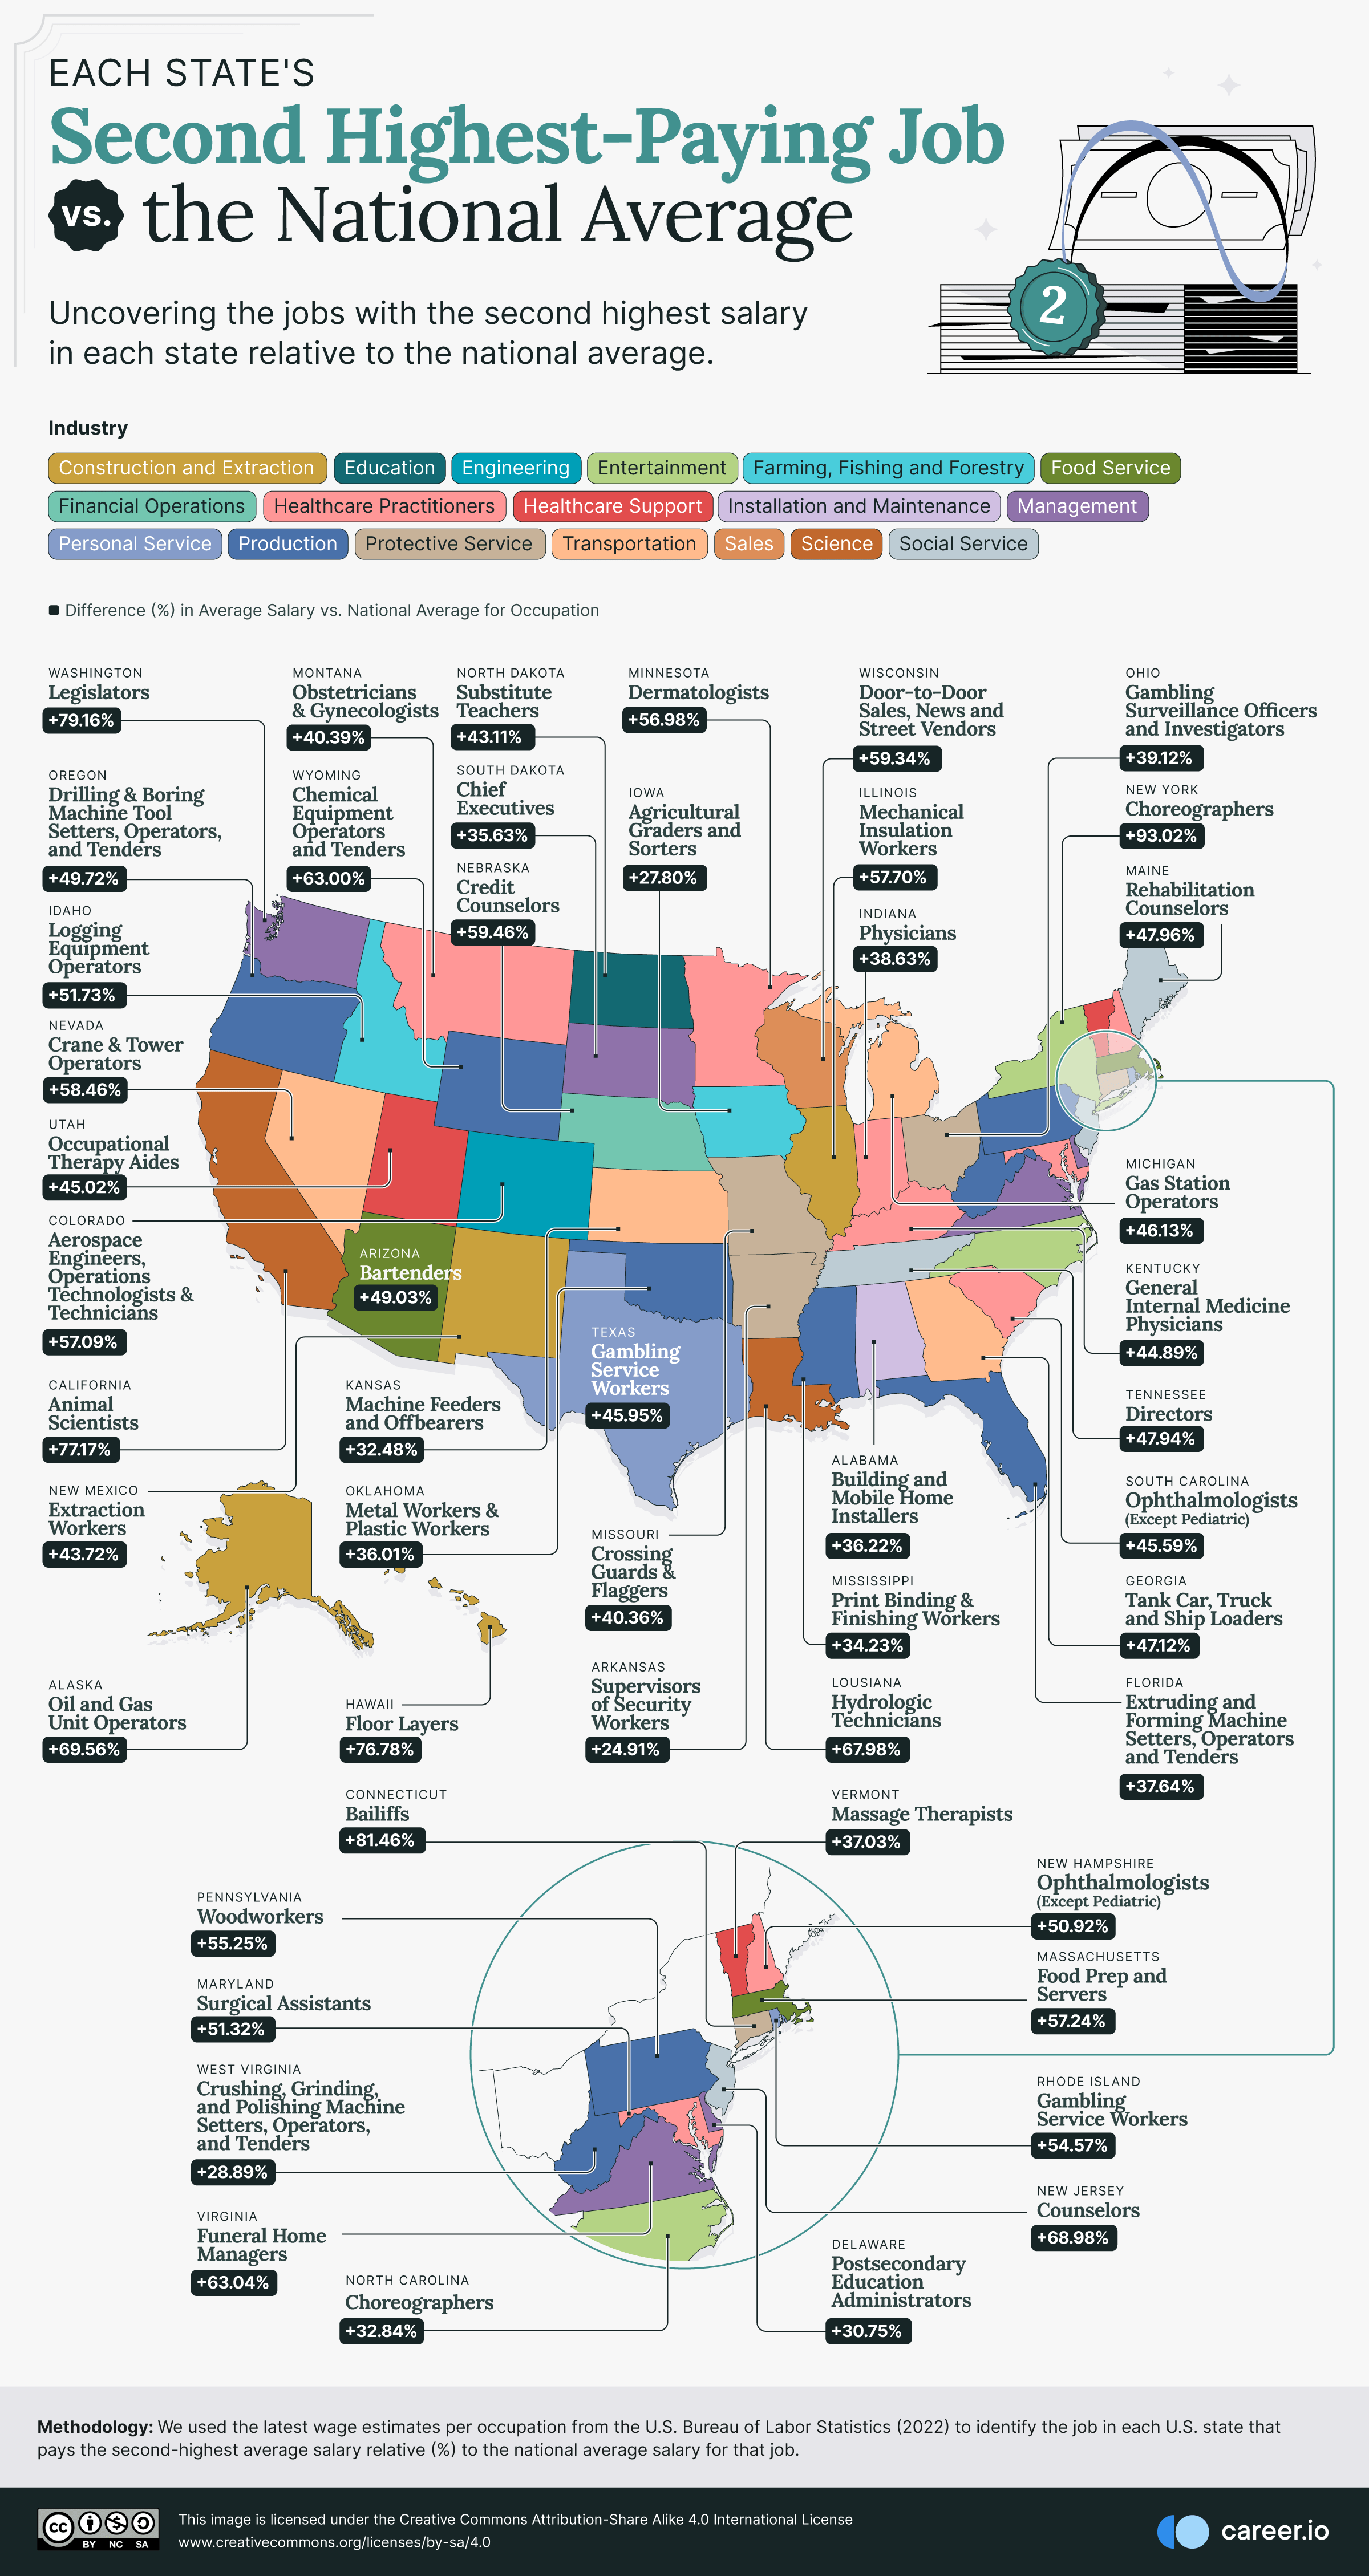 02 Each-States-Second-Highest-Paying-Job-vs-the-National-Average